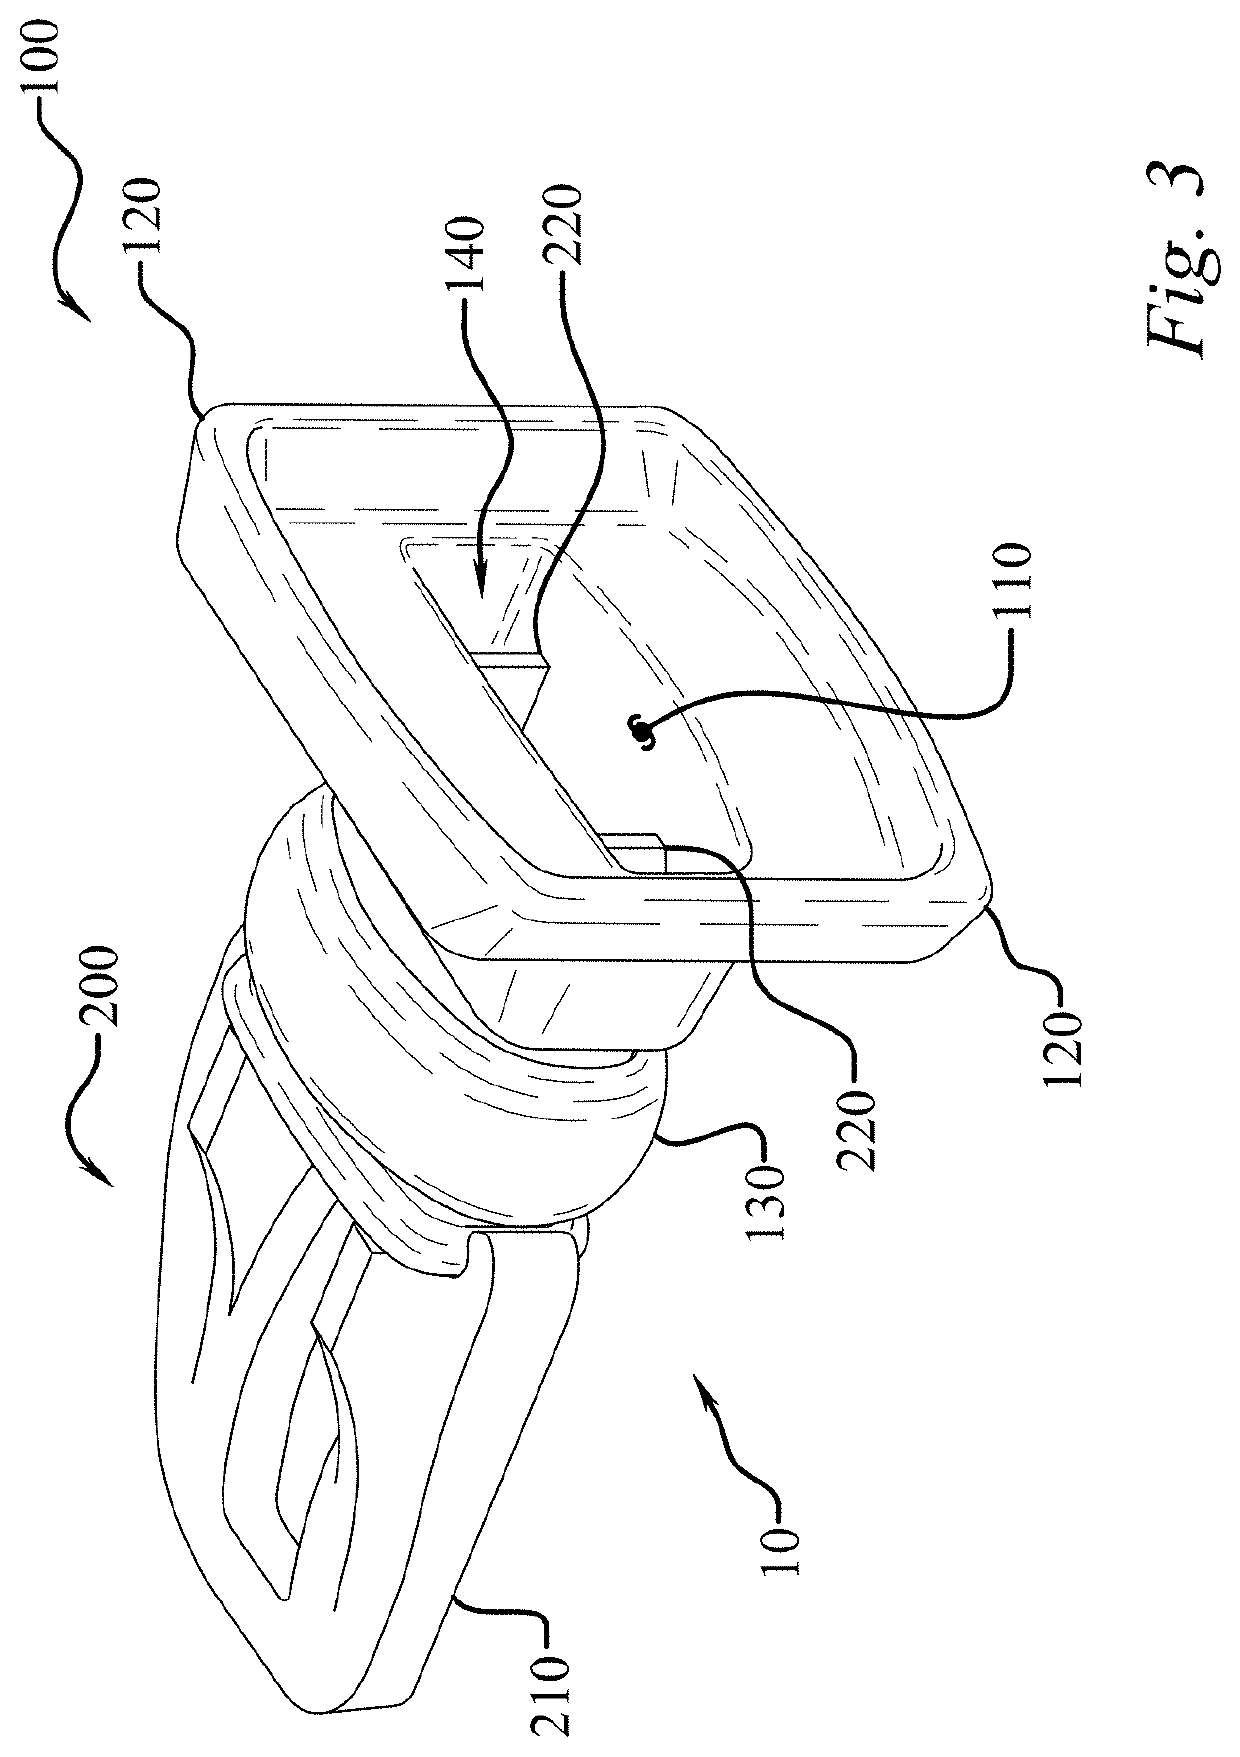 Immobilization system having bite-block stabilization and method of using same